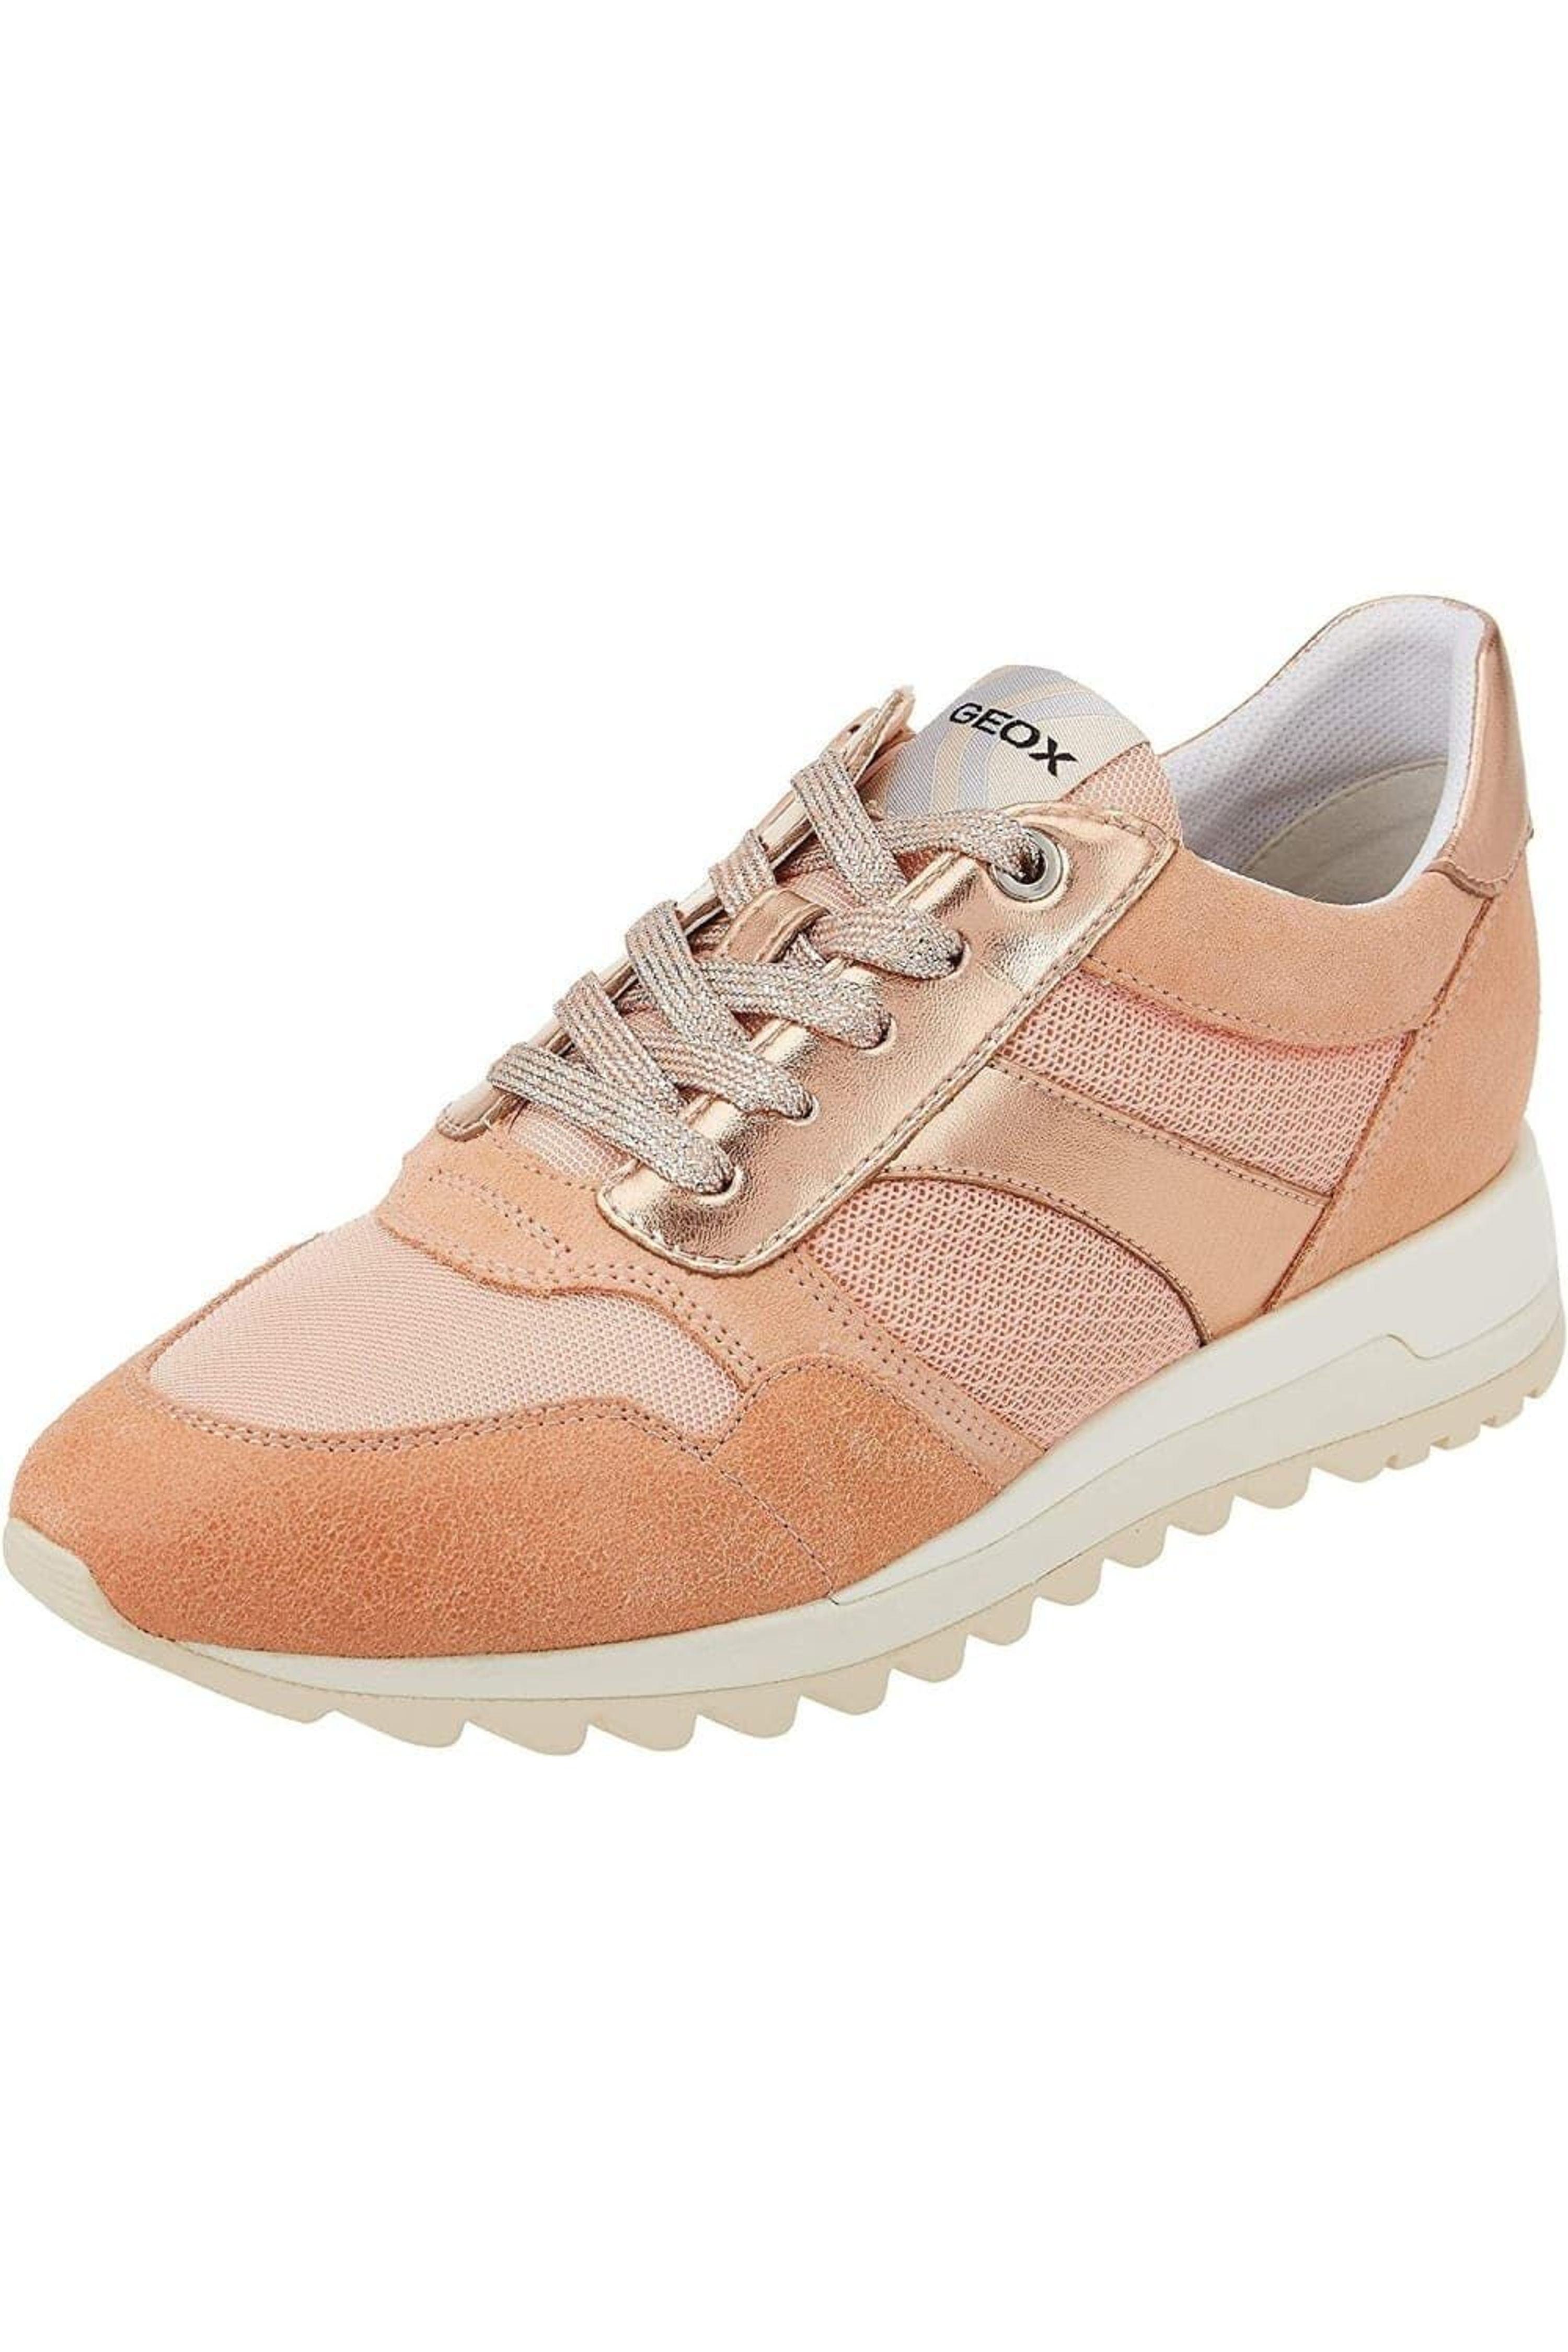 Geox Tabelya Leather Sneakers in Natural | Lyst